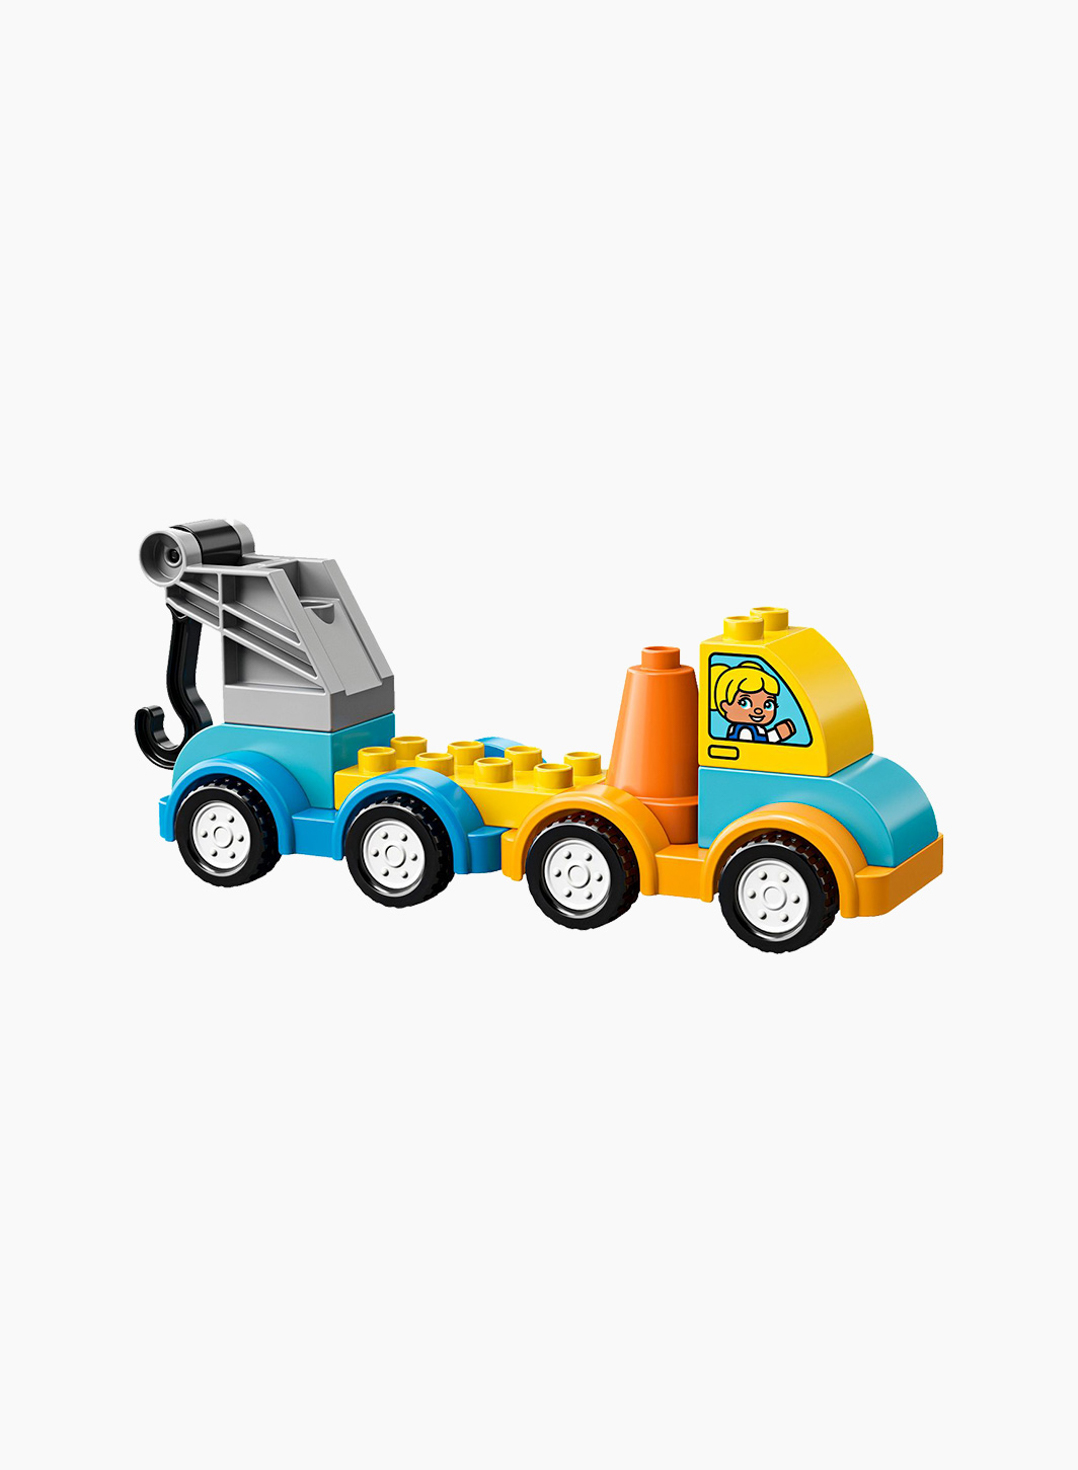 Lego Duplo Constructor My First Tow Truck